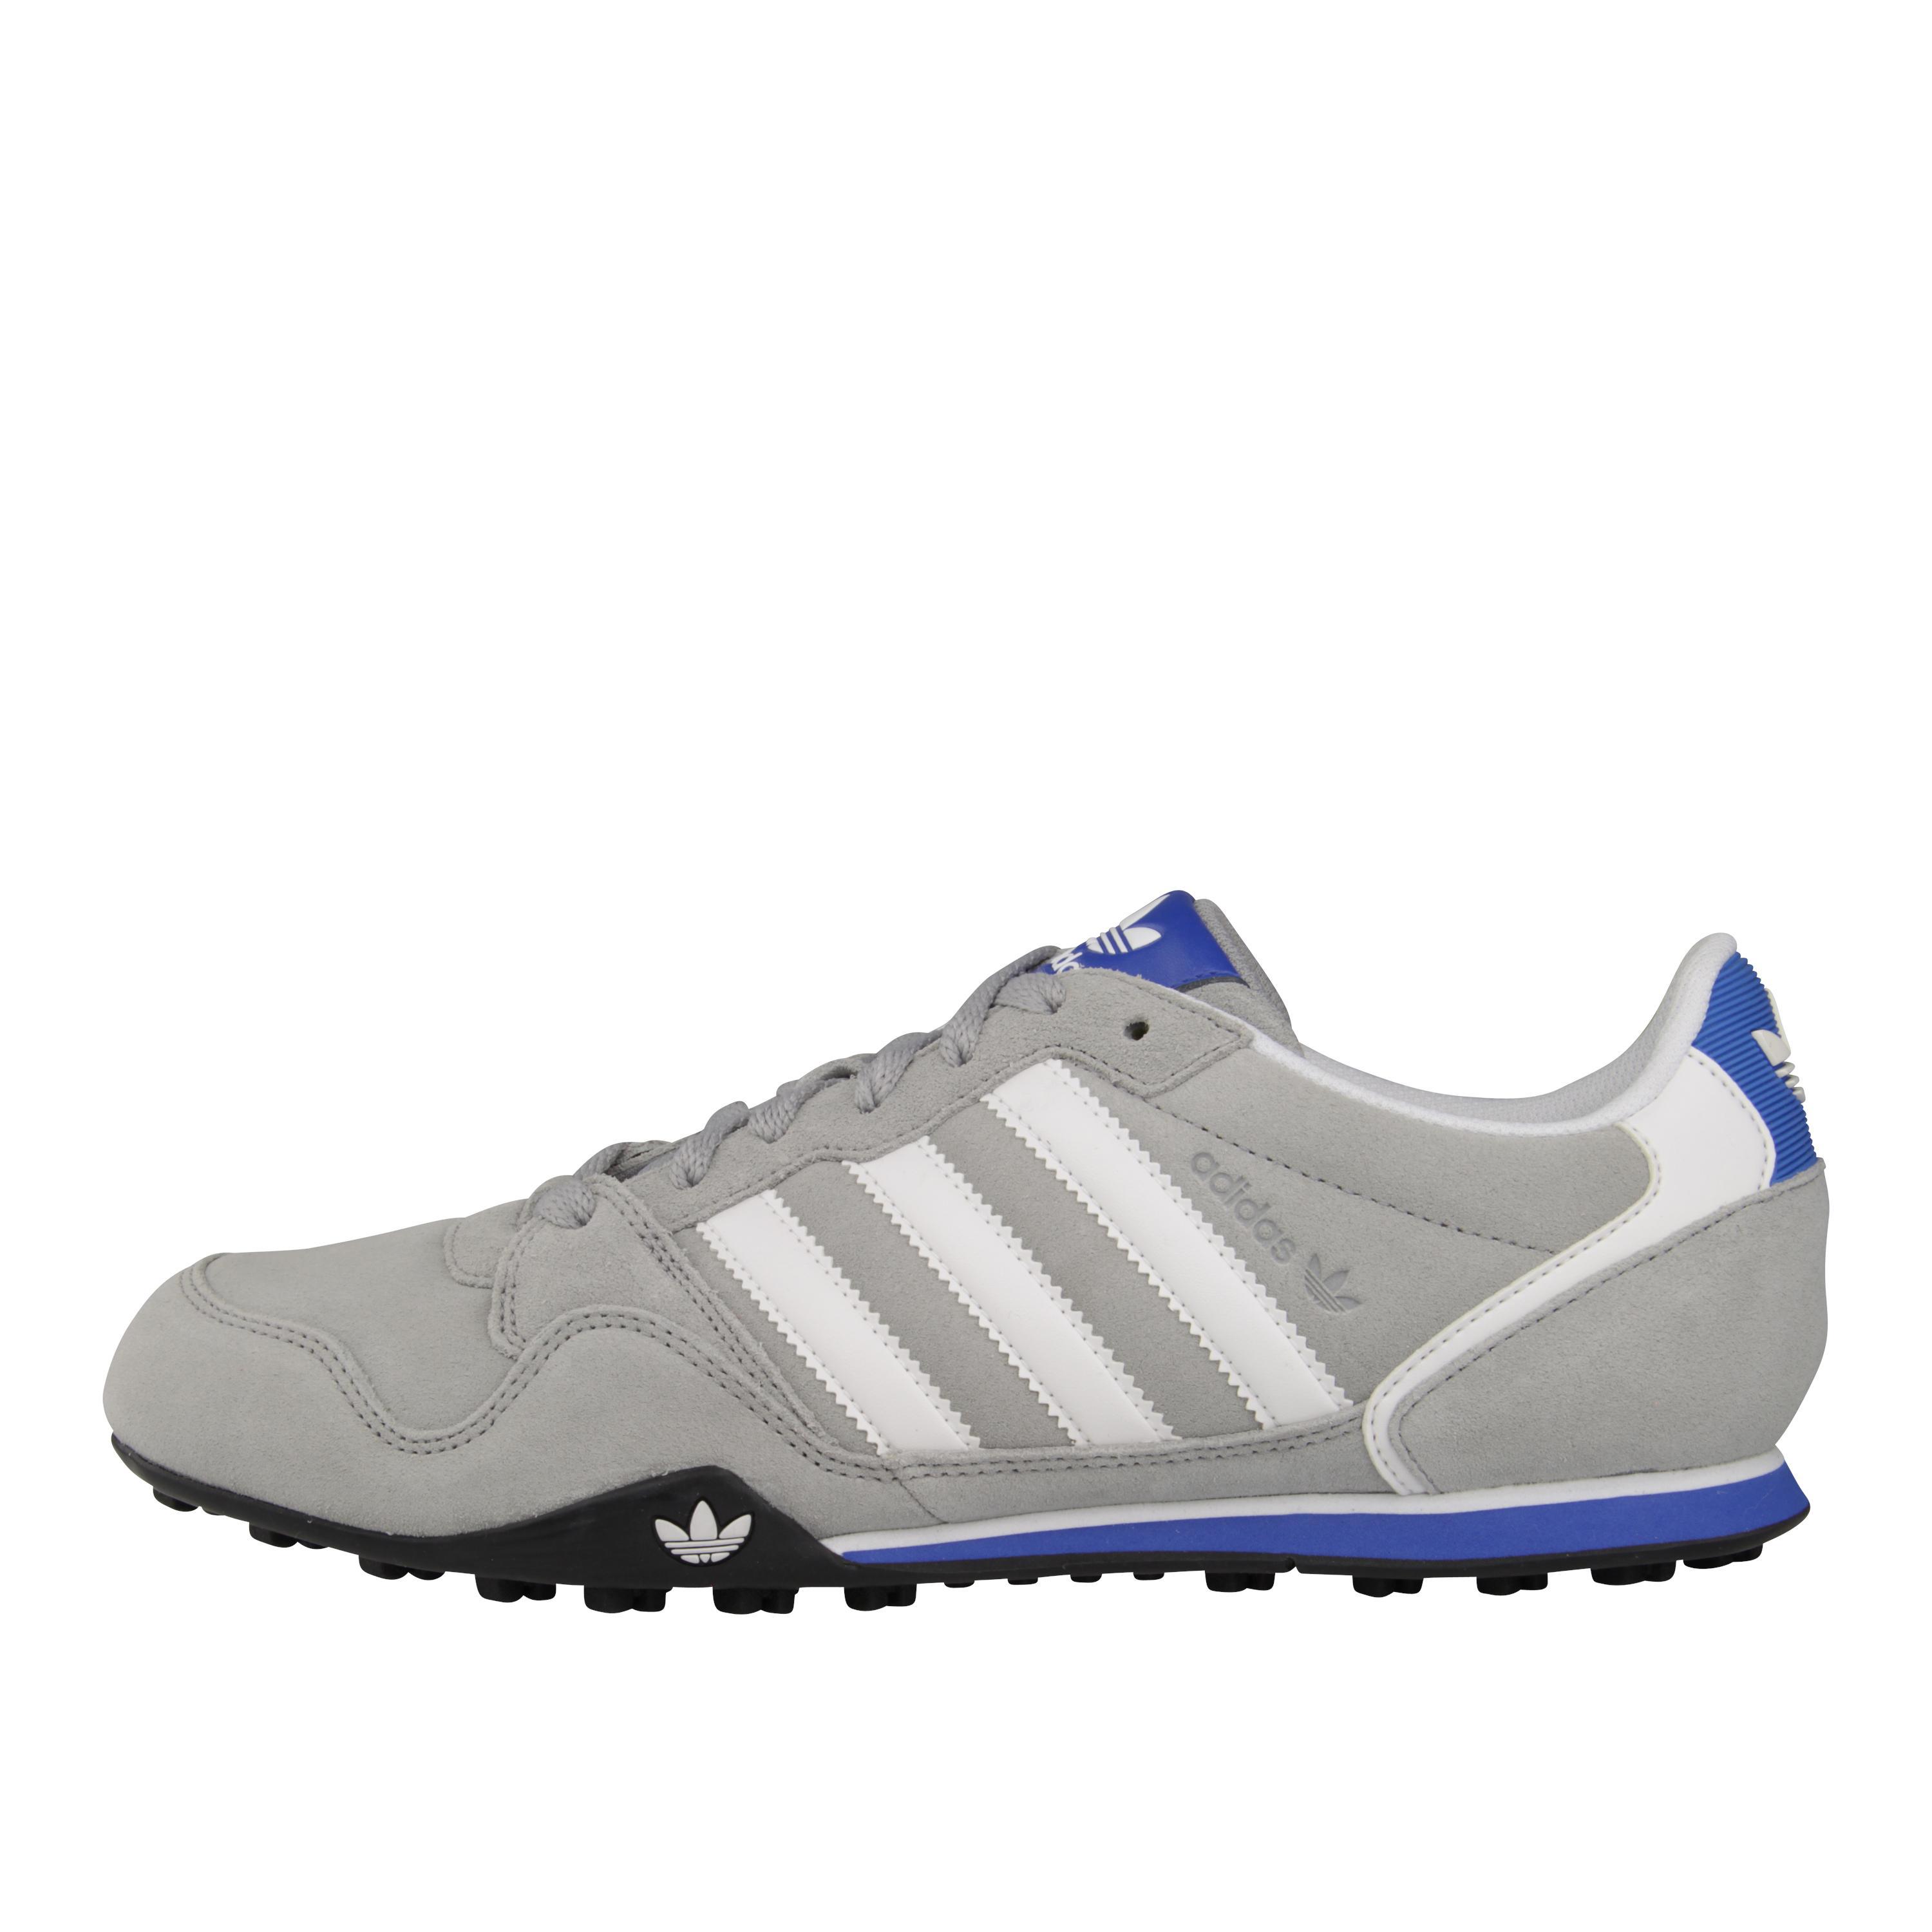 Foto adidas Zx Country 3 foto 390362